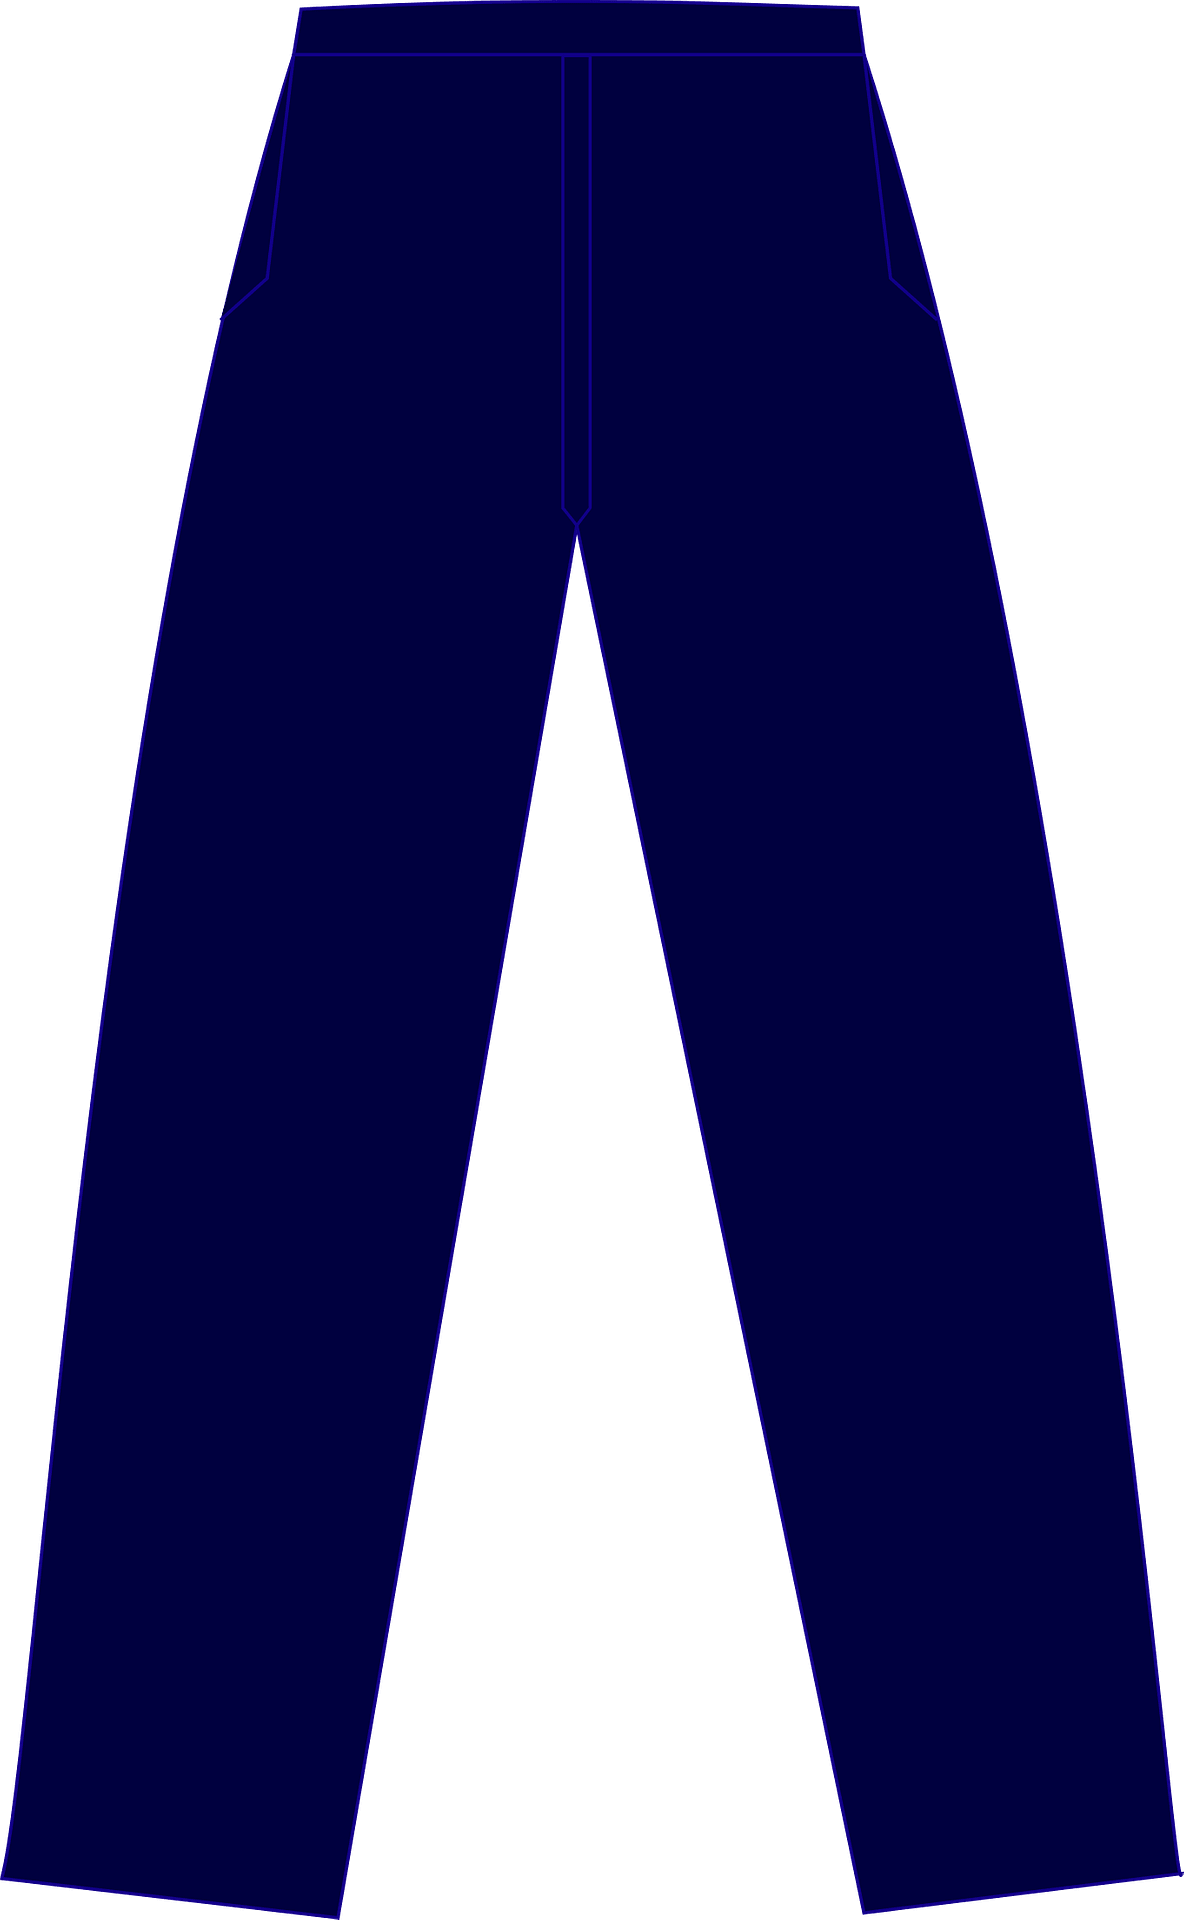 pants Blue pant cliparts png 2 - Clipart Library - Clip Art Library